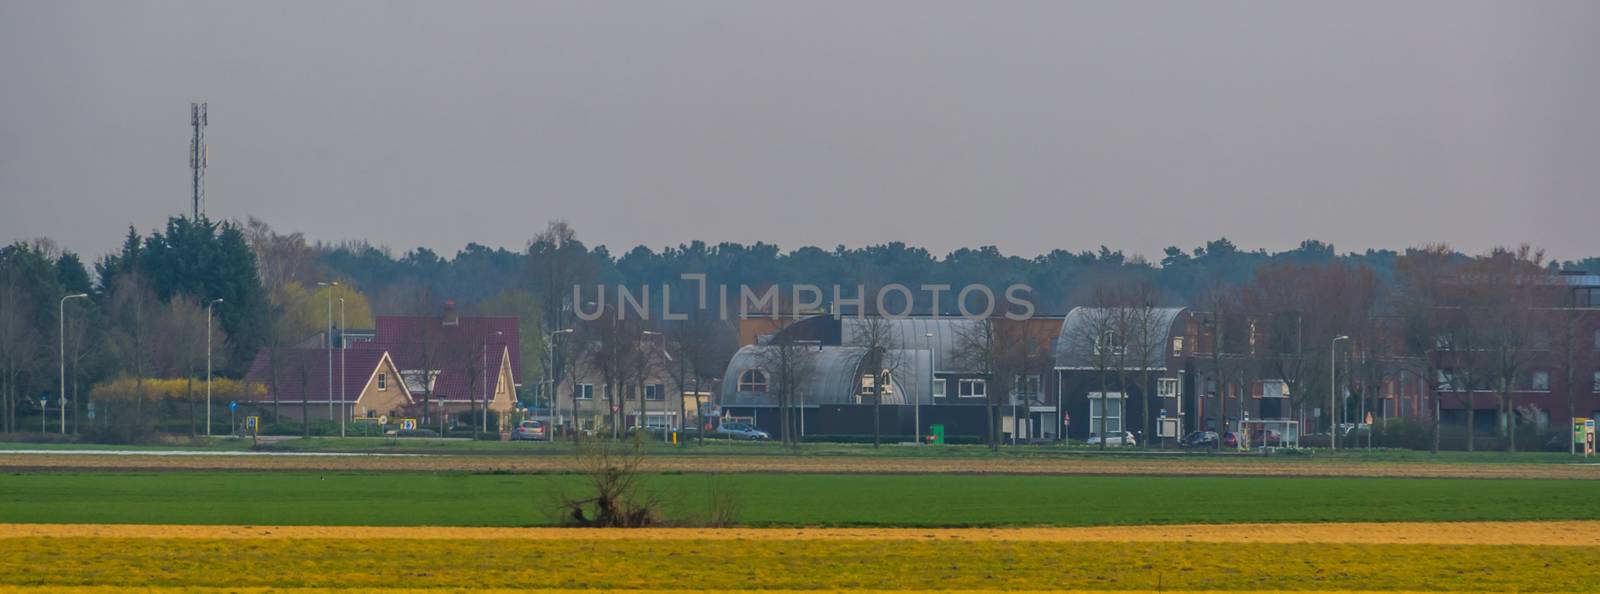 small rural Dutch village, Rucphen, North brabant, The Netherlands, classical small village by charlottebleijenberg